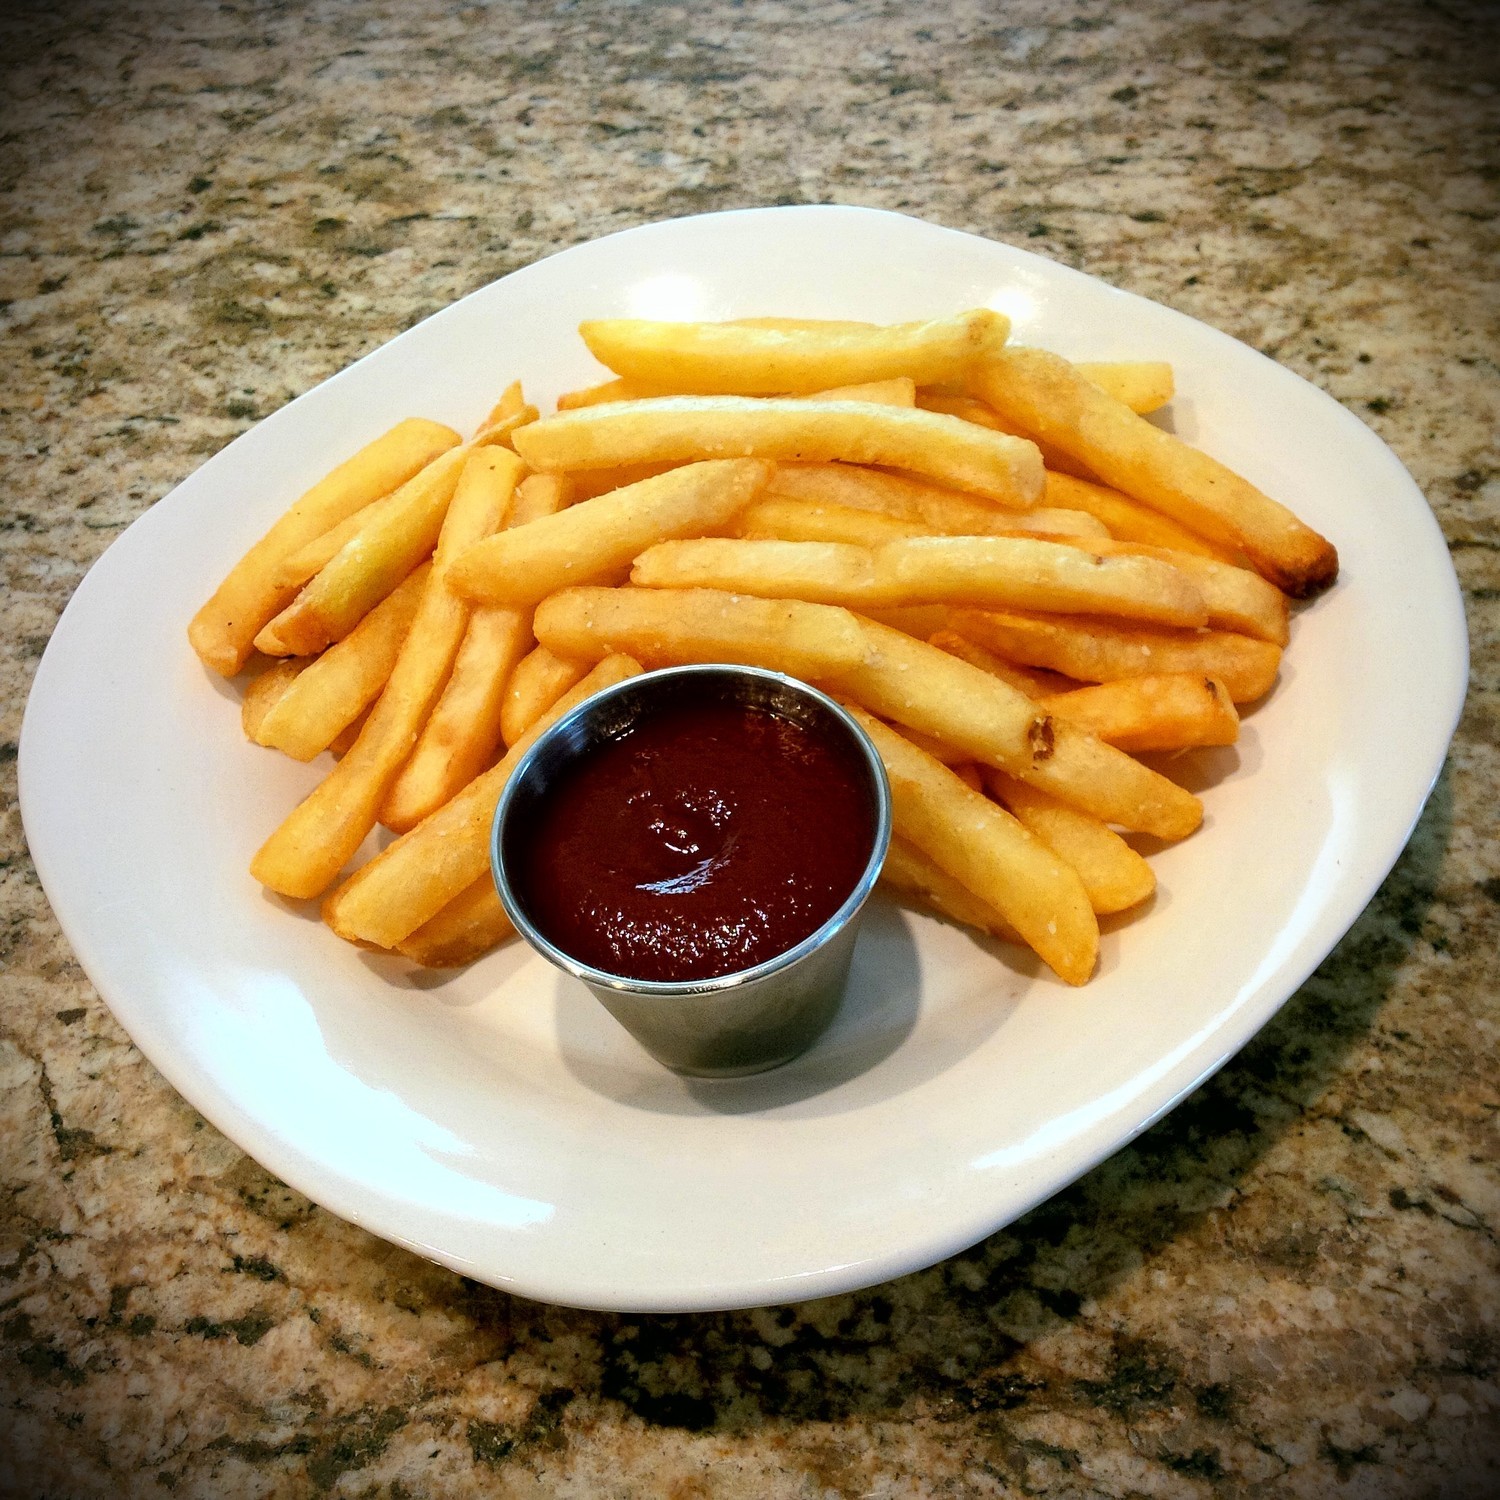 Gluten-Free French Fries